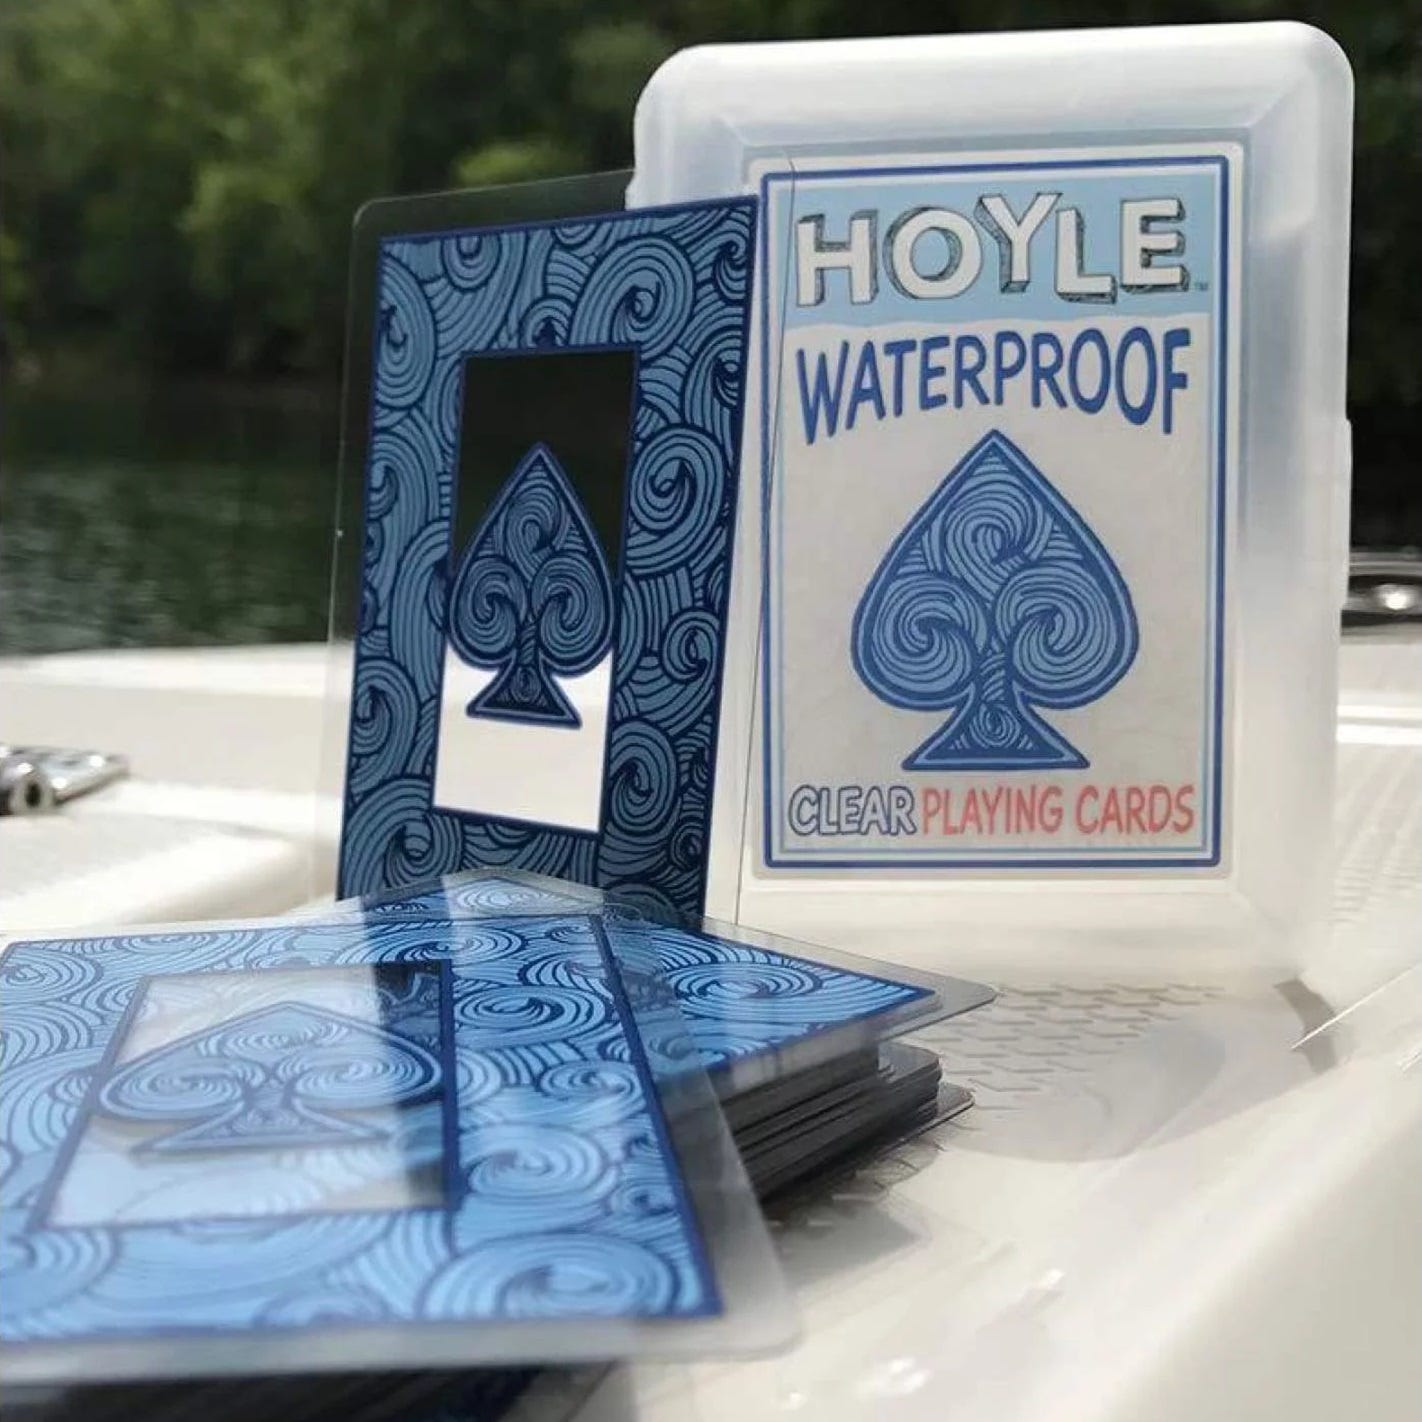 A deck of Hoyle waterproof playing cards with a blue swirl design, displayed outside their clear storage case.